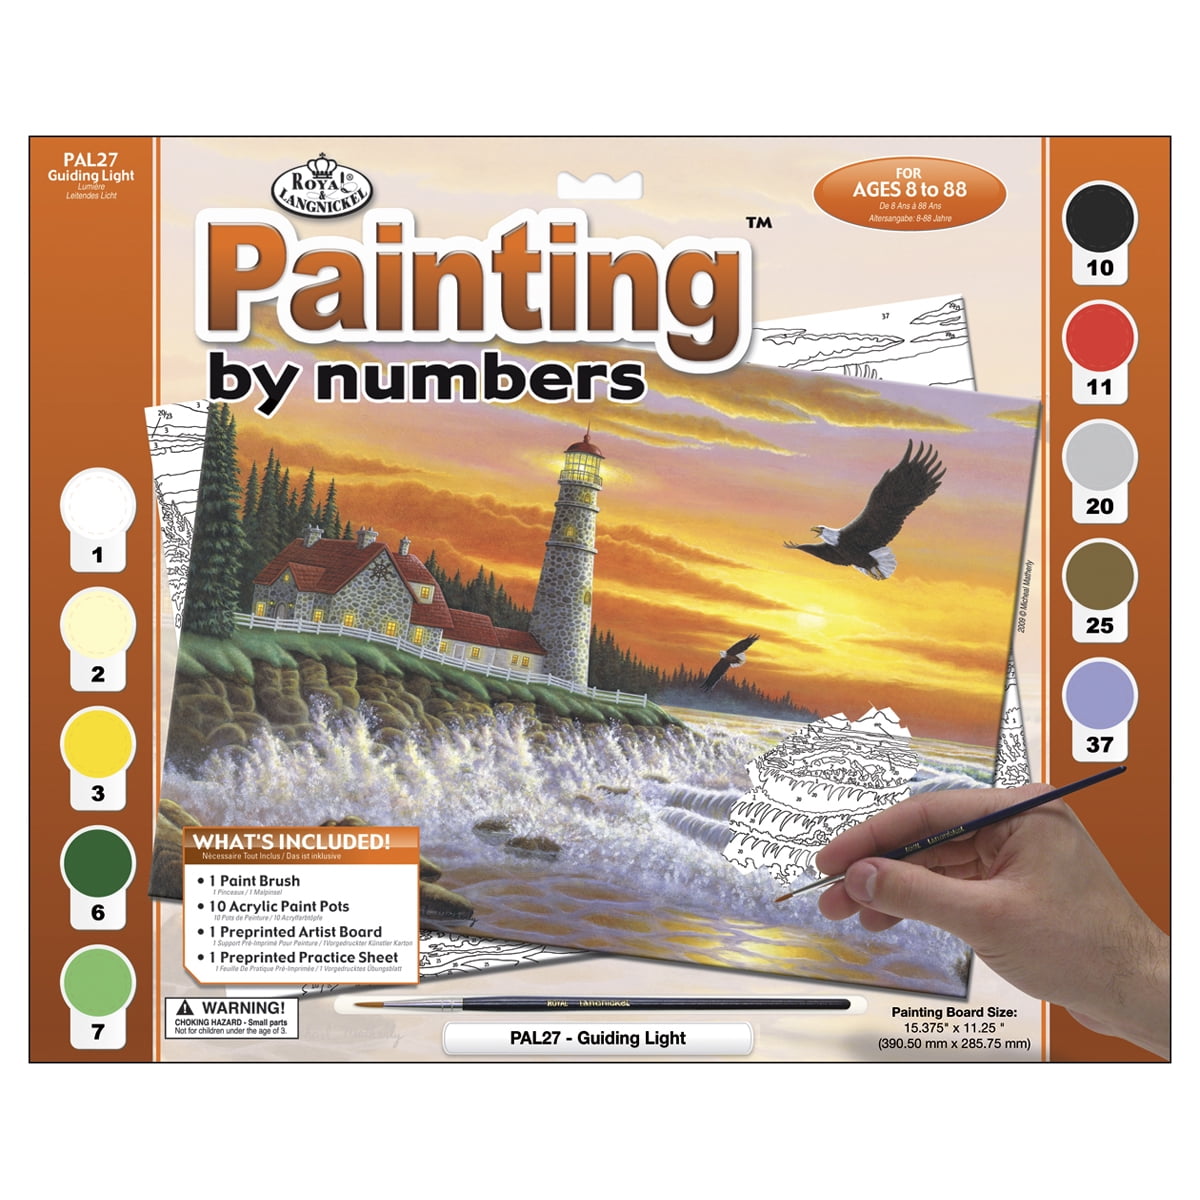 Limebrush DIY Paint by Numbers for Adults Beginner Set - Creative 12X16 Large Framed Canvas Adult Paint by Number Kit with Reusable Brushes